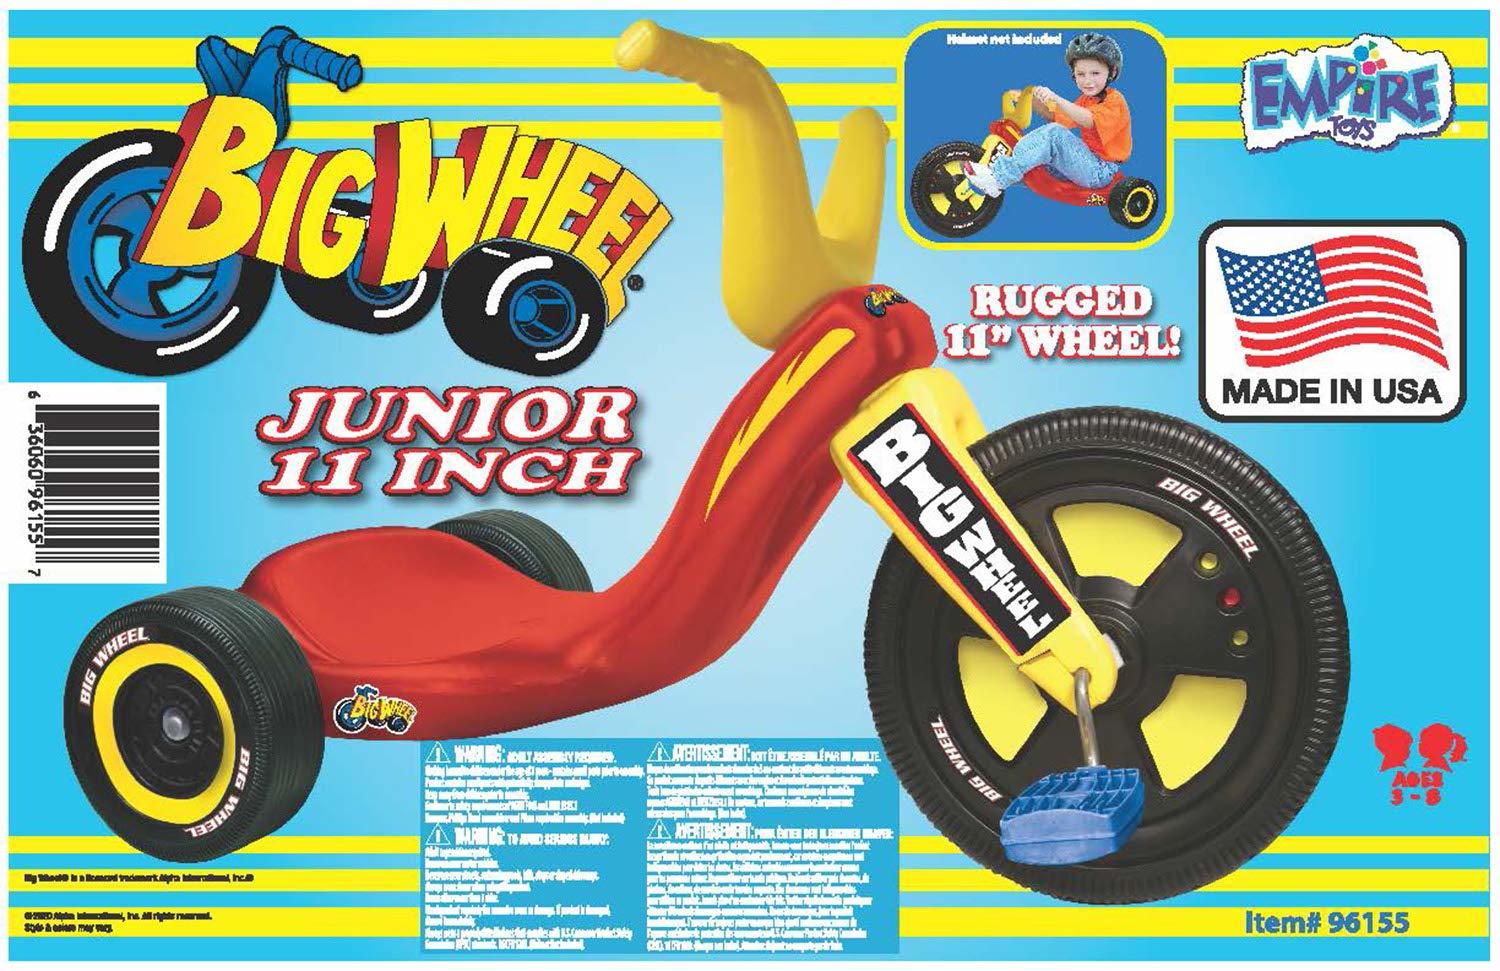 Primary image for The Original Big Wheel Junior Tricycle Mid-Size Boys 11 Ride-On